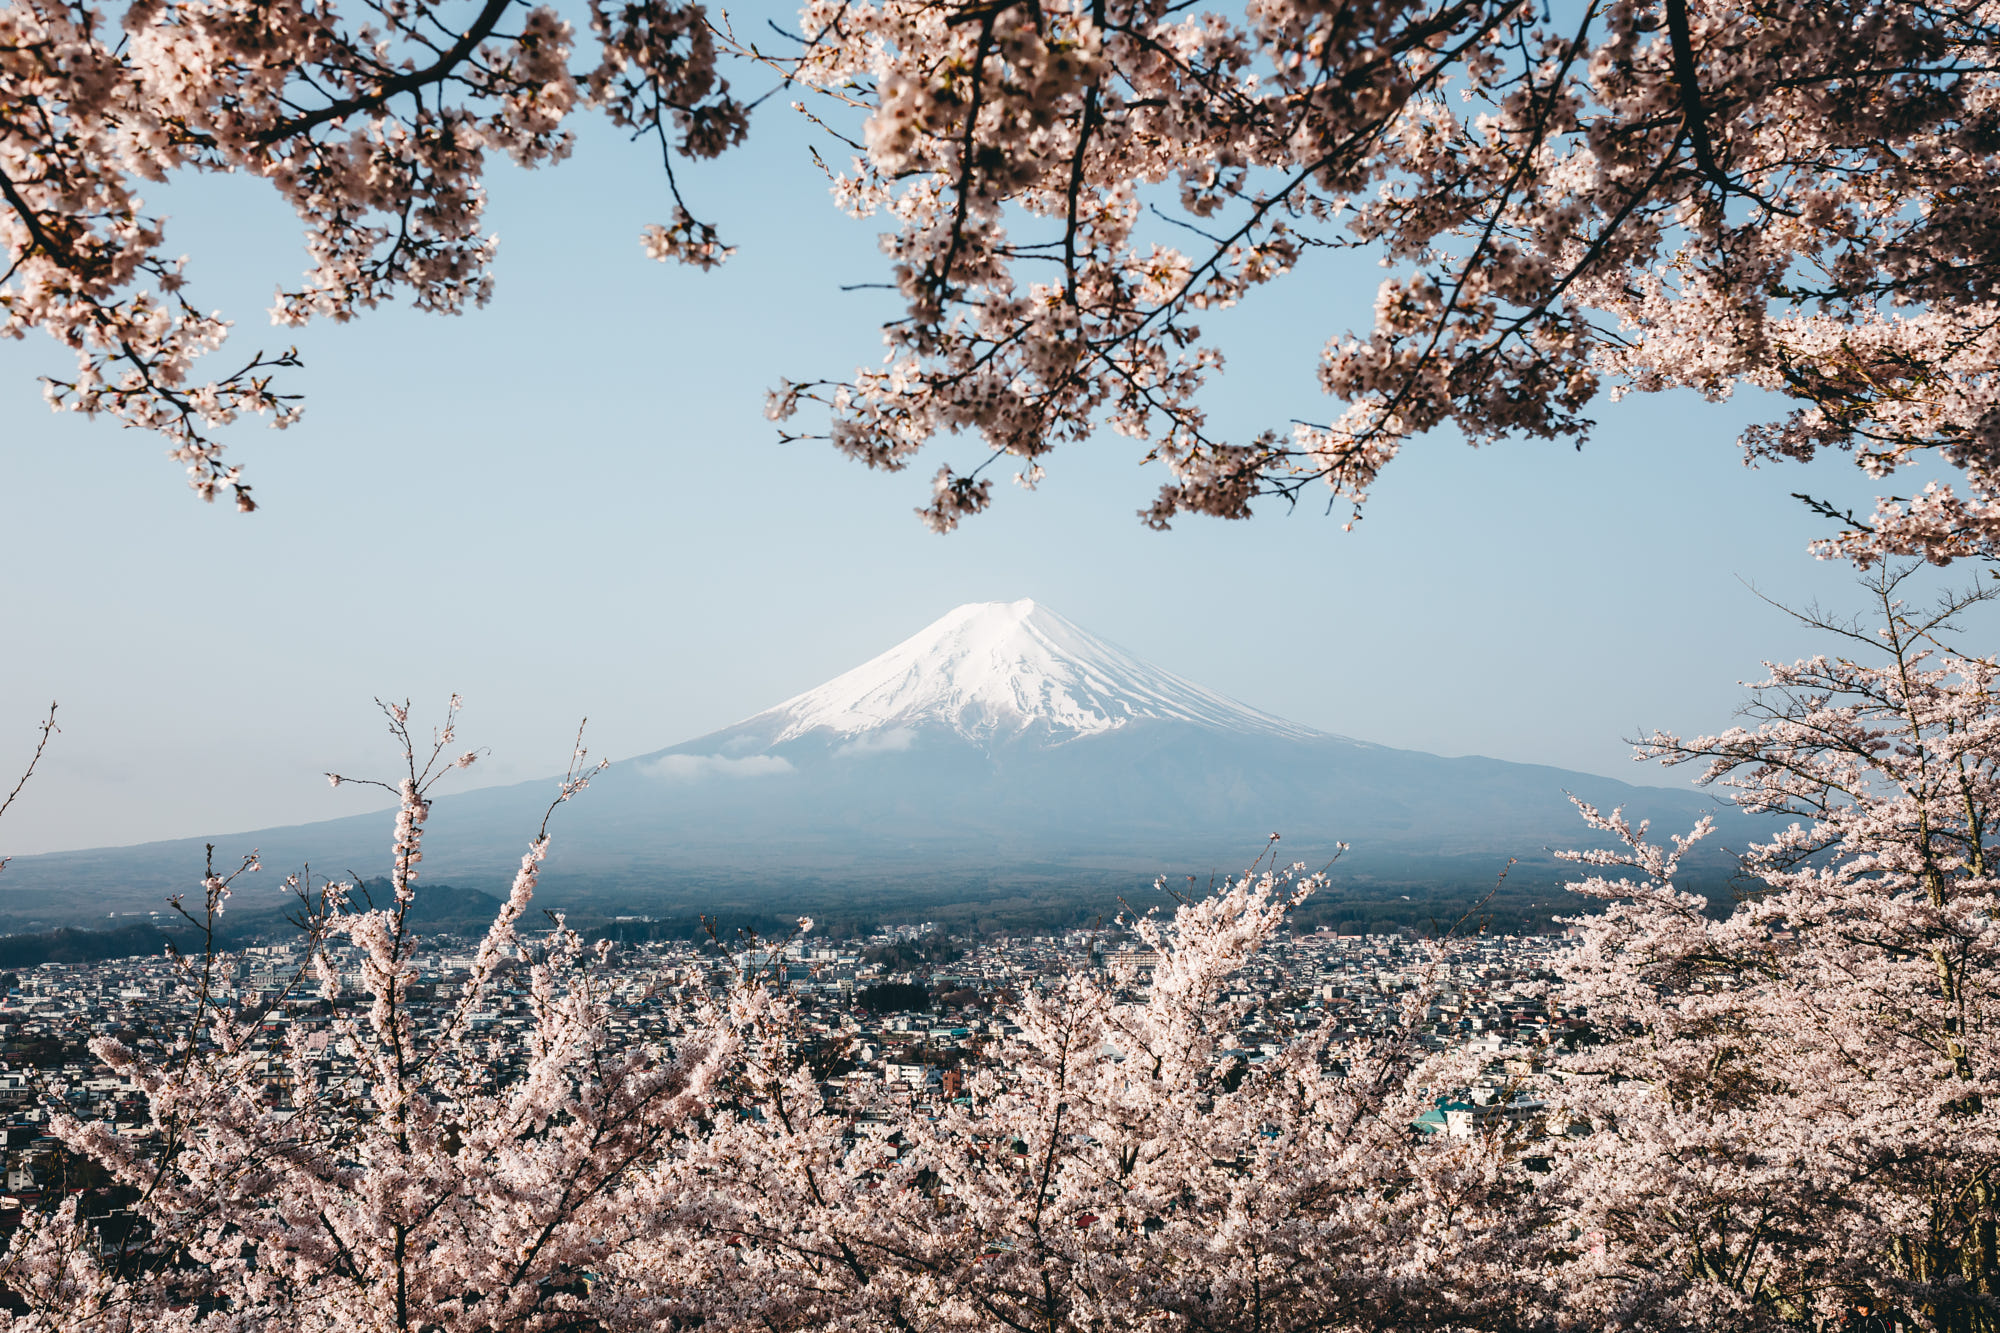 General 2000x1333 landscape photography nature mountains Mount Fuji flowers snow volcano Japan